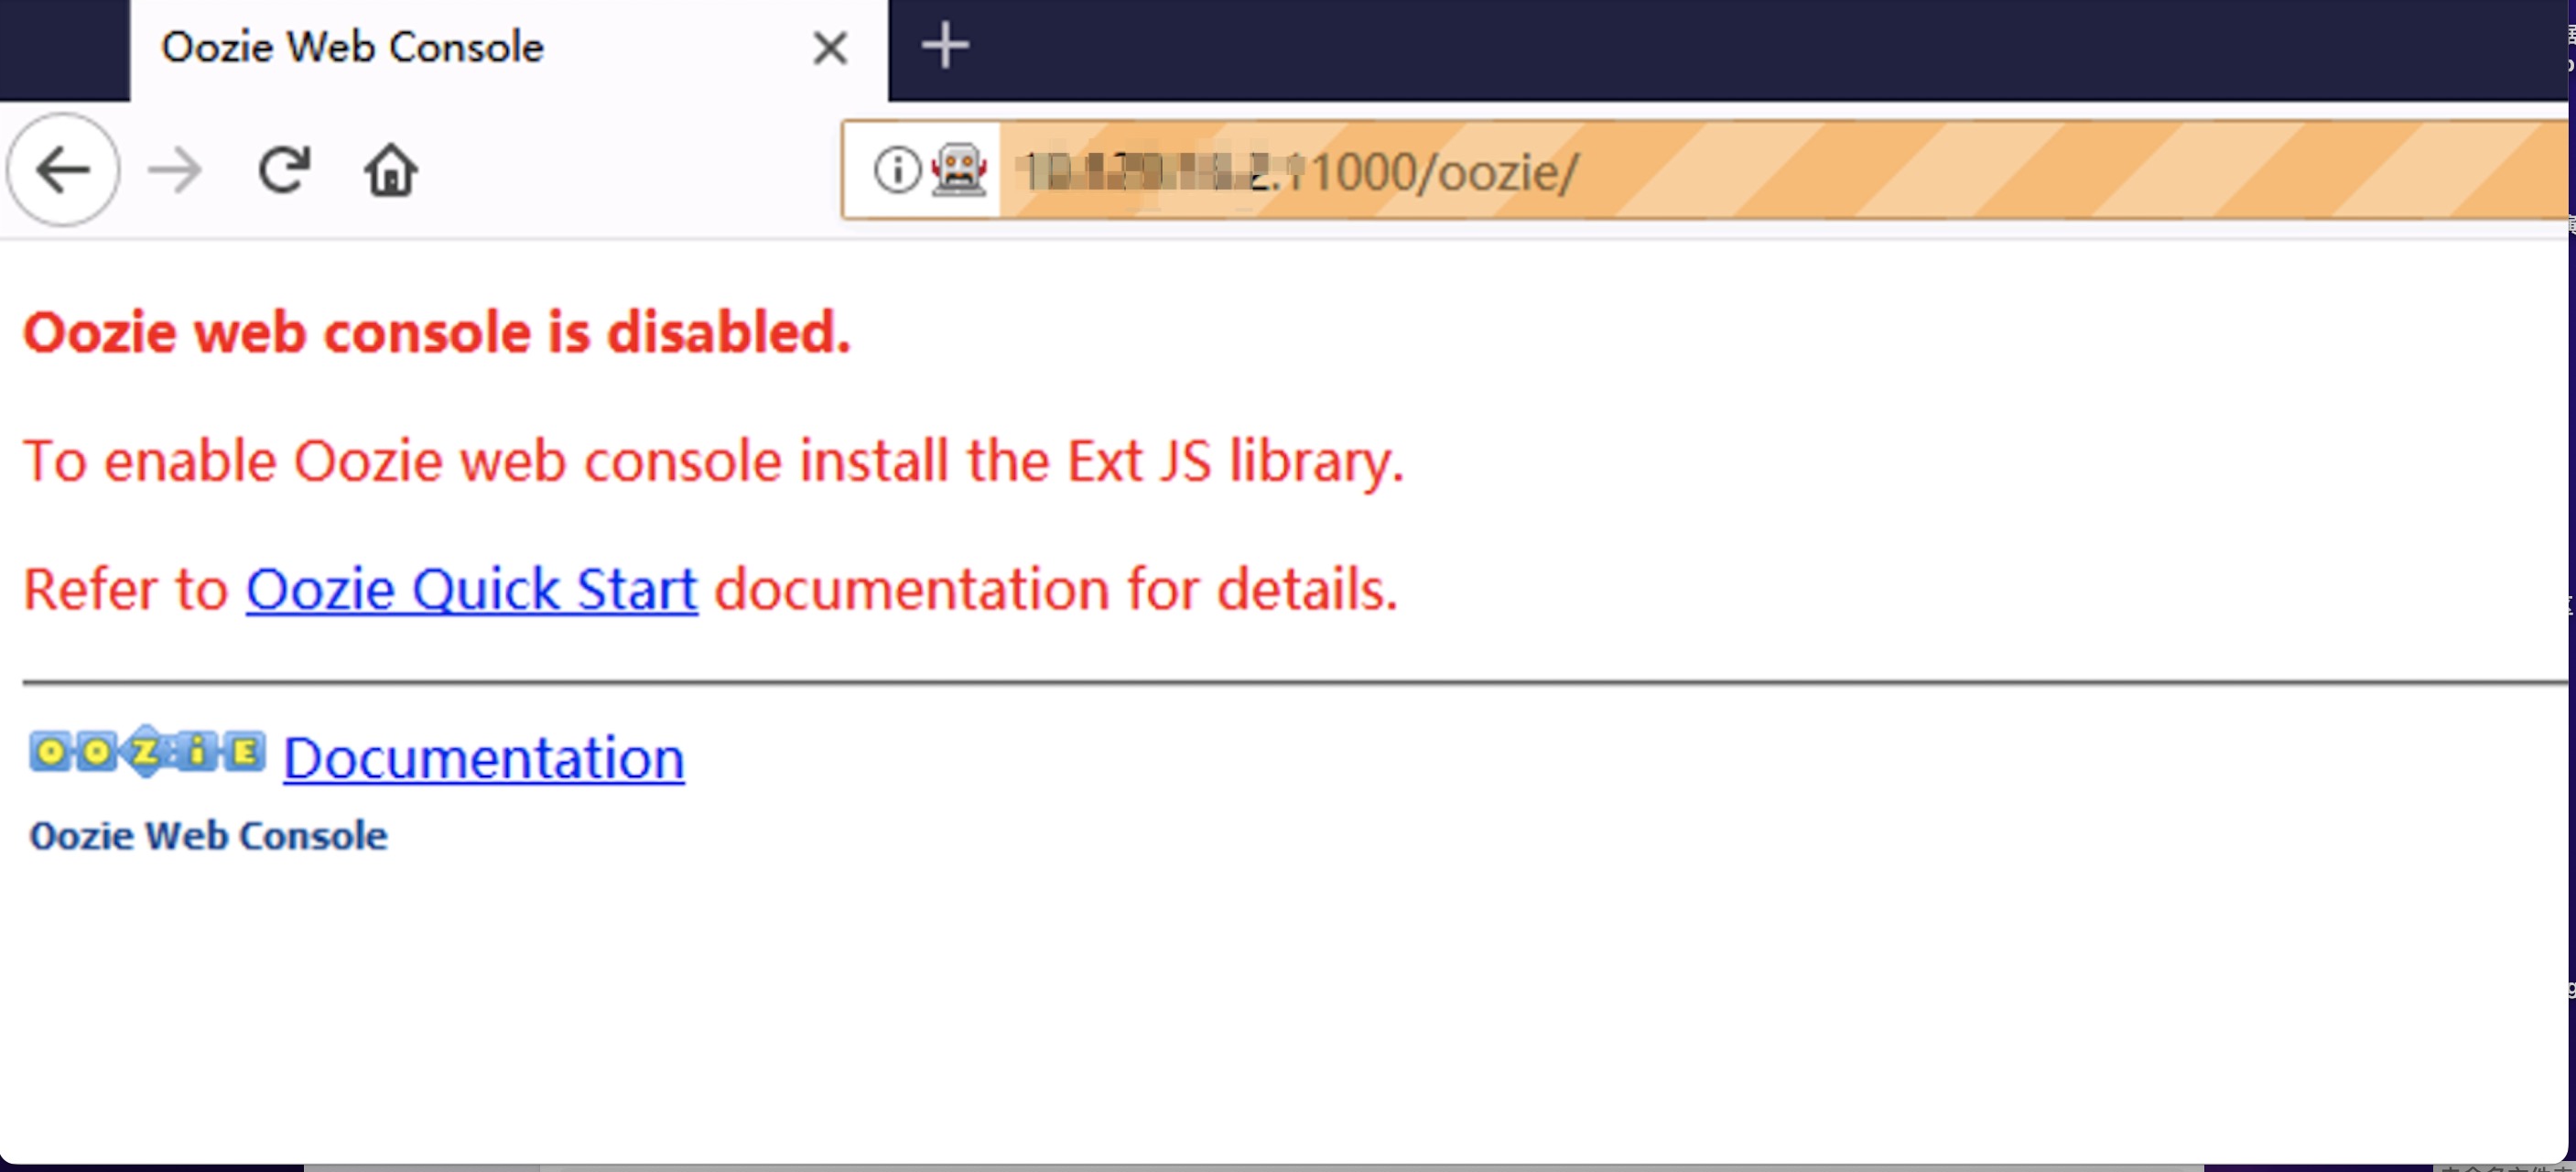 Oozie web console is disabled 问题解决